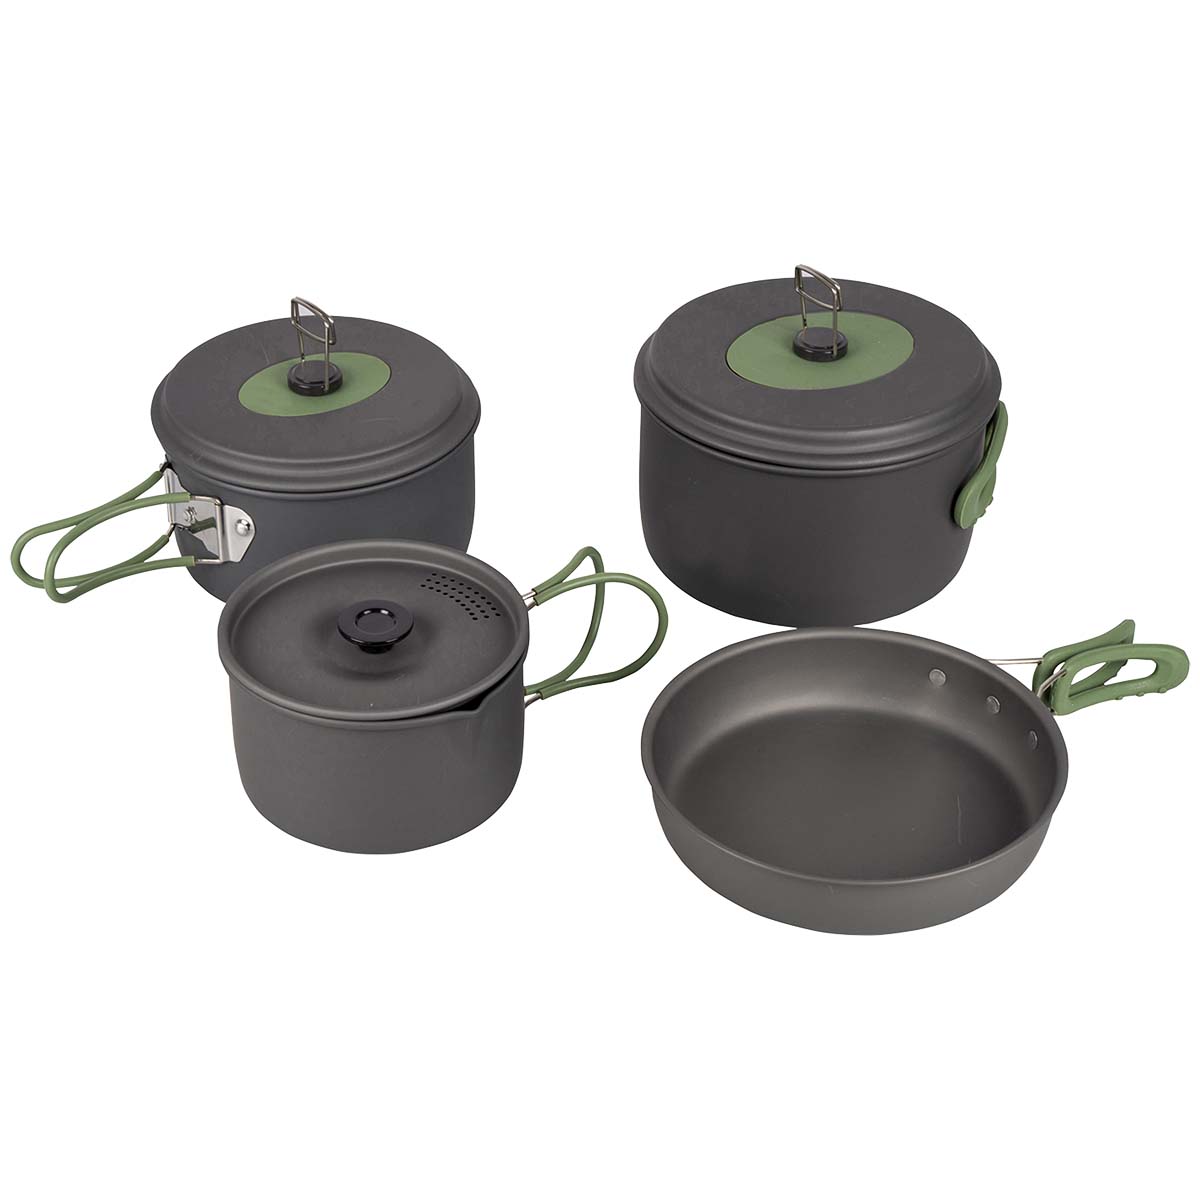 2200241 Complete 4-part light weight cookware set. This pan set consists of 3 sauce pans with a lid and a saucepan. Perfectly suitable for outdoor use. Suitable for gas and gasoline burners. Made of sturdy anodized aluminium causing a reduced risk of burning. Every pan has a heat-resistant silicone folding handle. These handles can be easily folded around the pan so that the pans are compact to store and transport. Including lining Dimensions of cooking pans (Øxh): 13.5x7.5, 15.5x8.5 and 17.5x10.5 cm. Dimensions of cooking pan (Øxh): 18x4.5 cm. Dimensions nested (Øxh): 19x11.5 cm. Contents: 1, 1.4 and 2.2 litres.